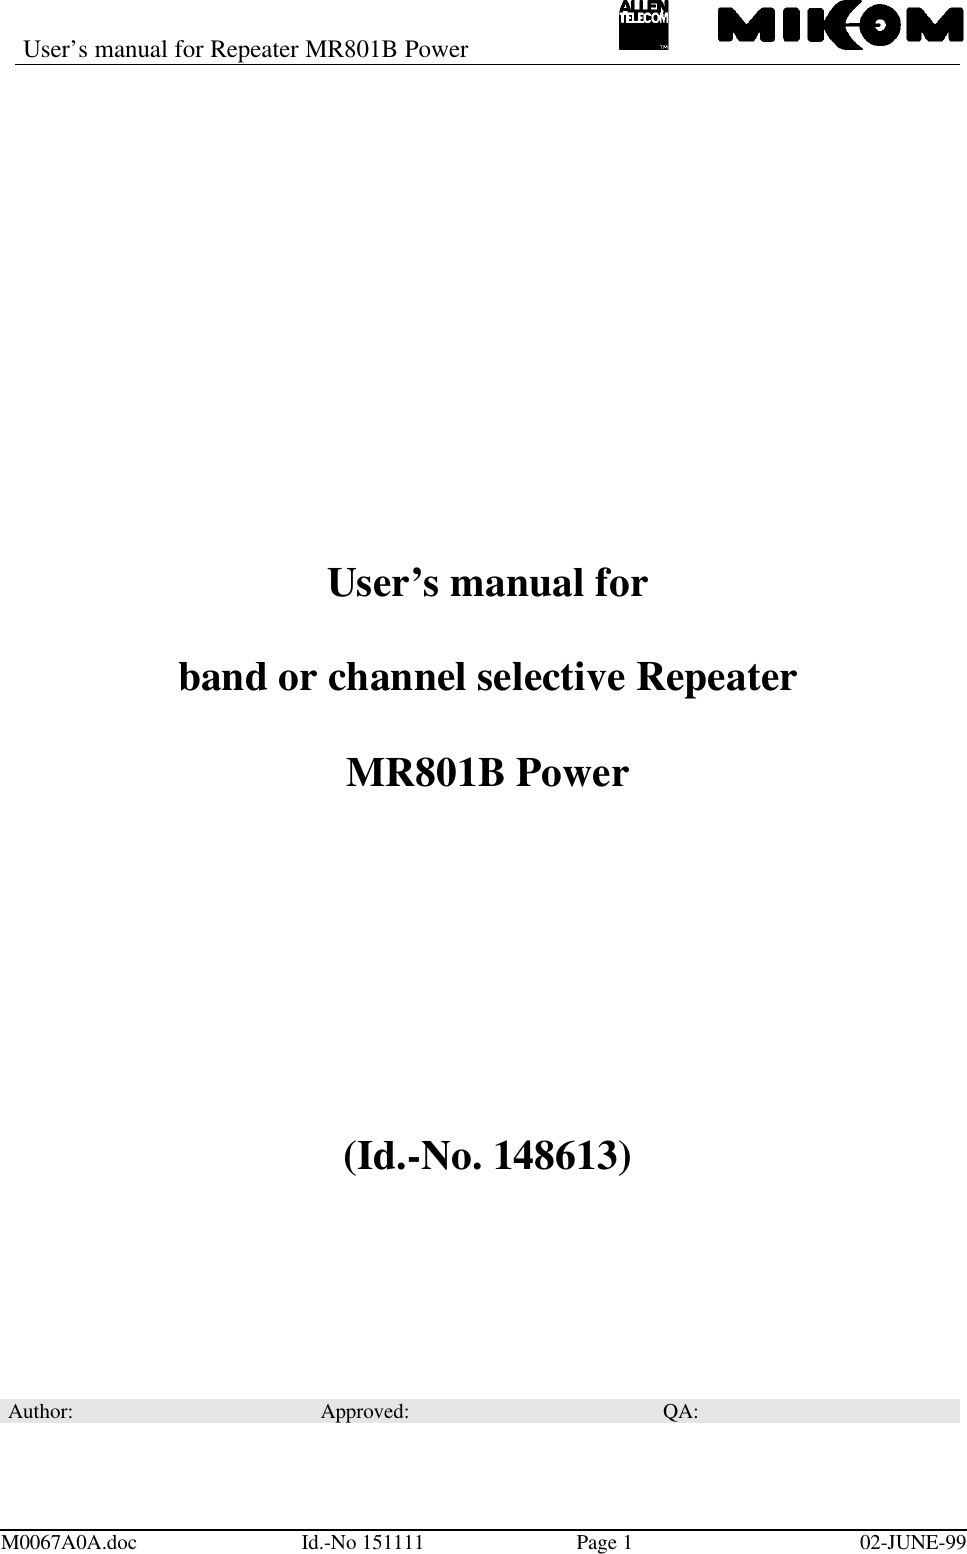 User’s manual for Repeater MR801B PowerM0067A0A.doc Id.-No 151111 Page 102-JUNE-99User’s manual forband or channel selective RepeaterMR801B Power(Id.-No. 148613)Author: Approved: QA: